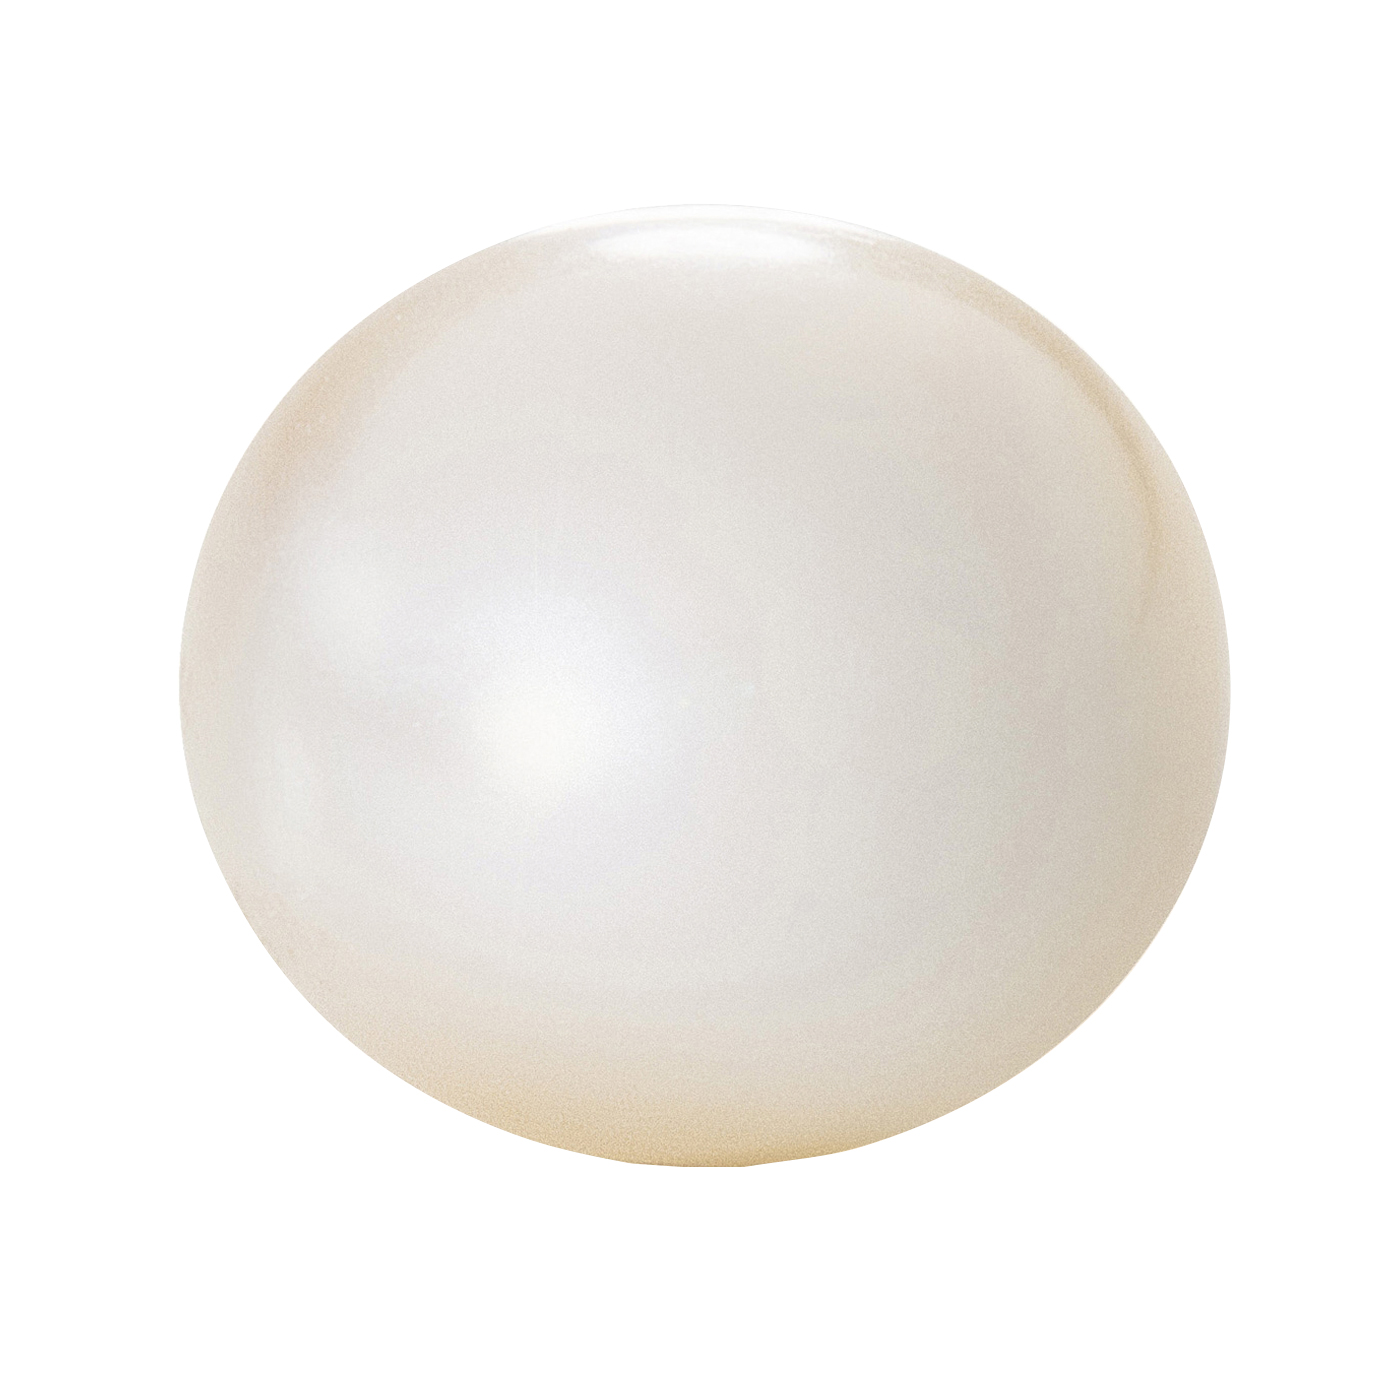 Cultured Pearl, Freshwater, Bouton, ø 8.0-8.5 mm, White - 1 piece